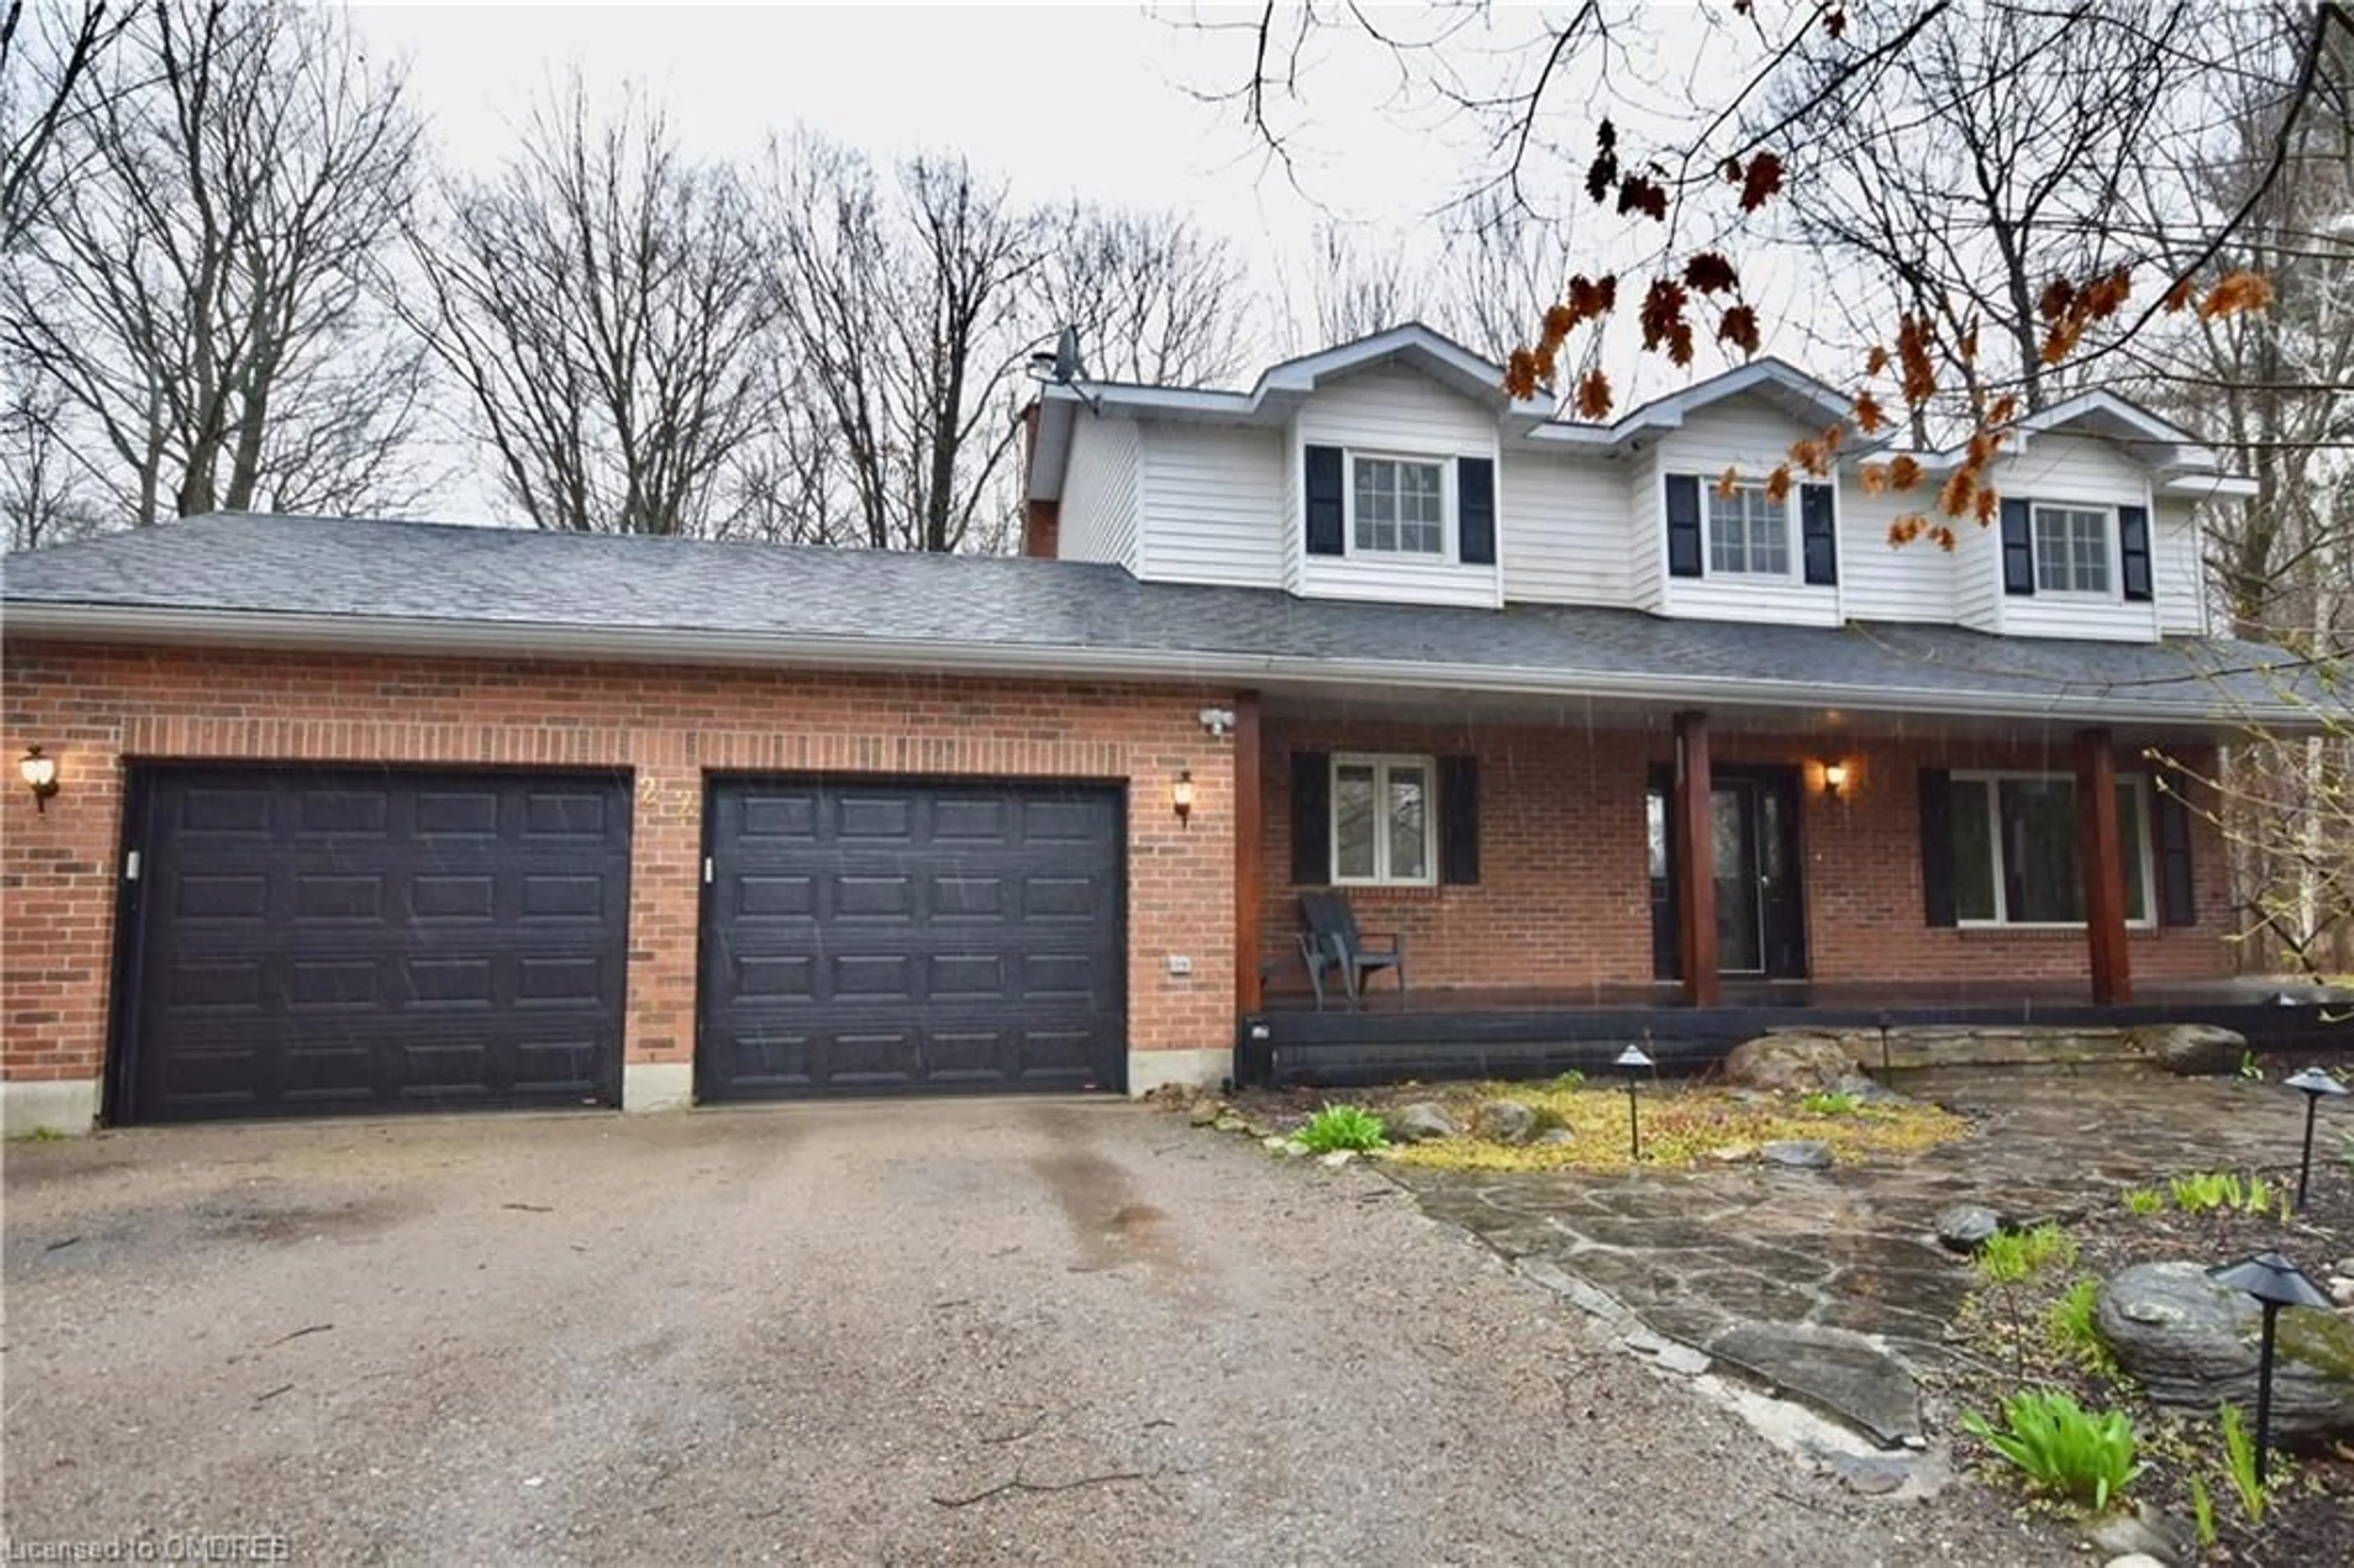 Home with brick exterior material for 22 Forestdale Dr, Penetanguishene Ontario L9M 1Z9